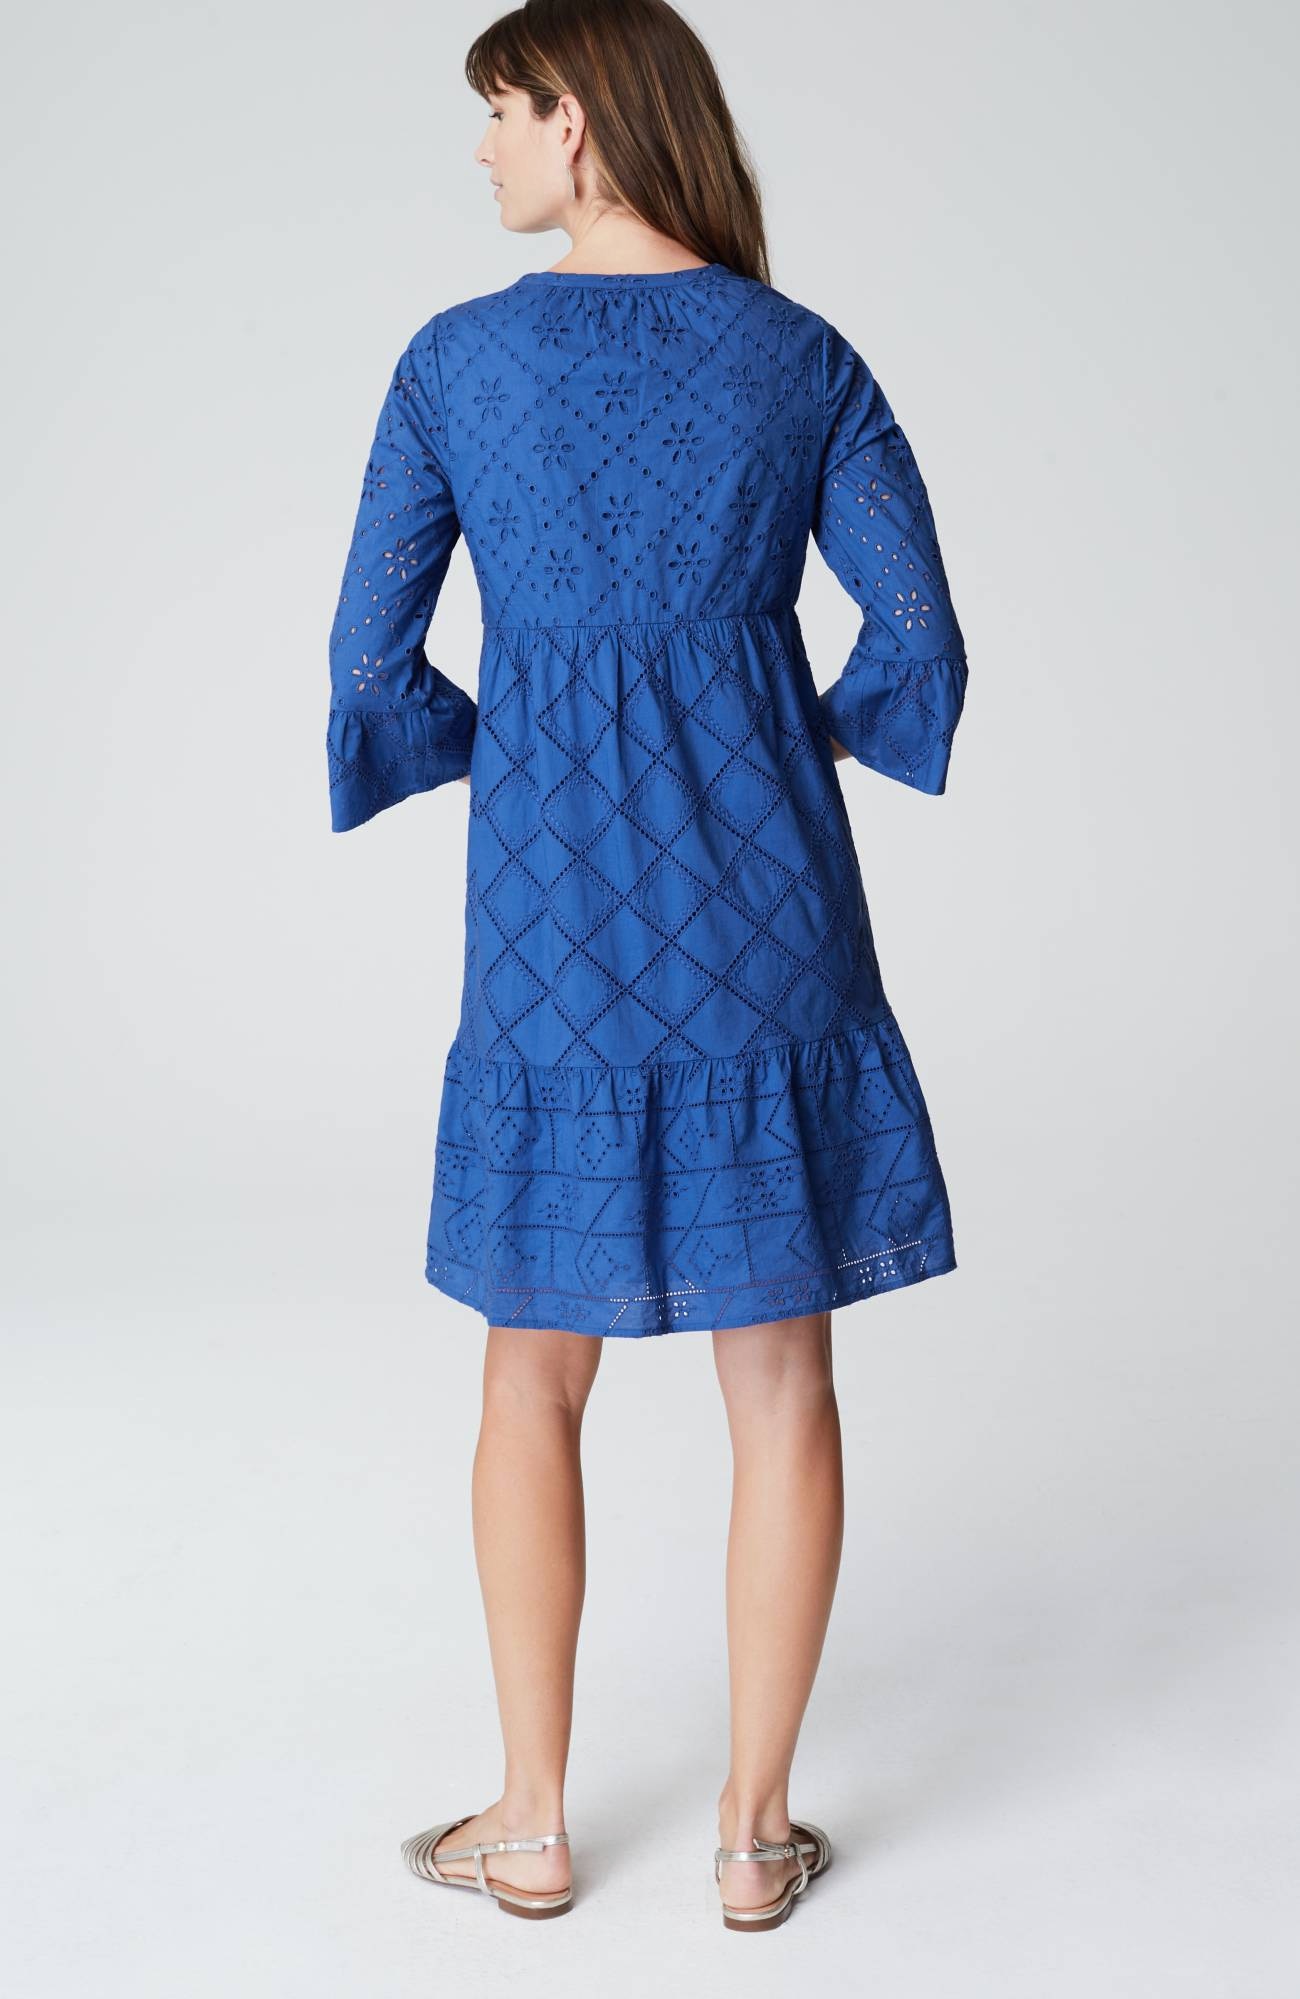 Tiered Eyelet Dress